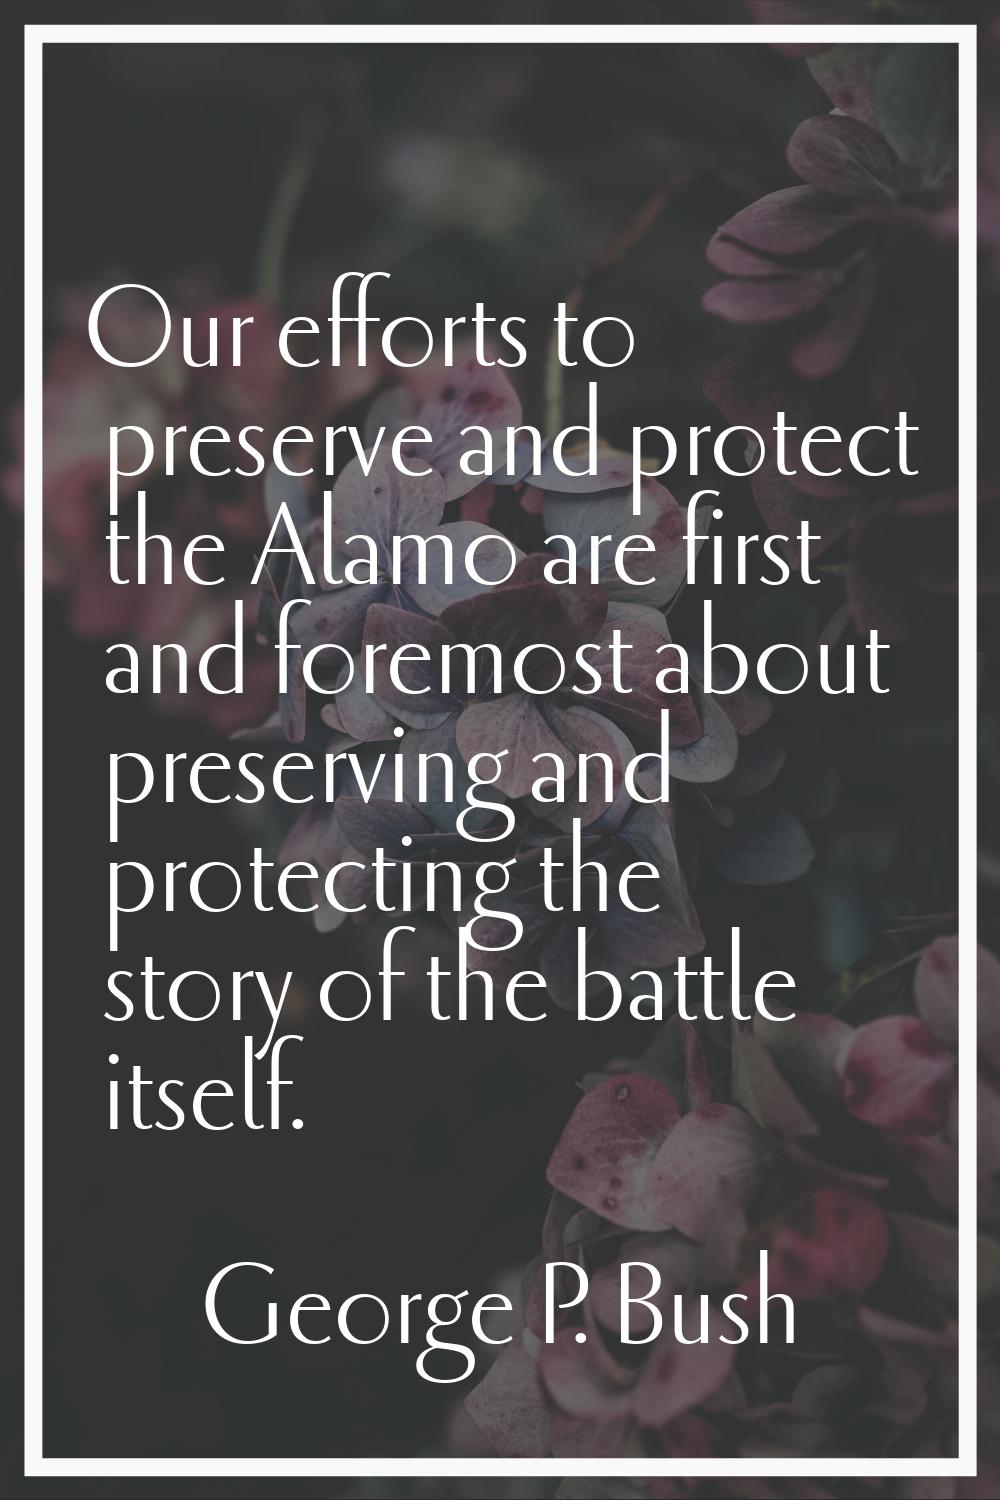 Our efforts to preserve and protect the Alamo are first and foremost about preserving and protectin